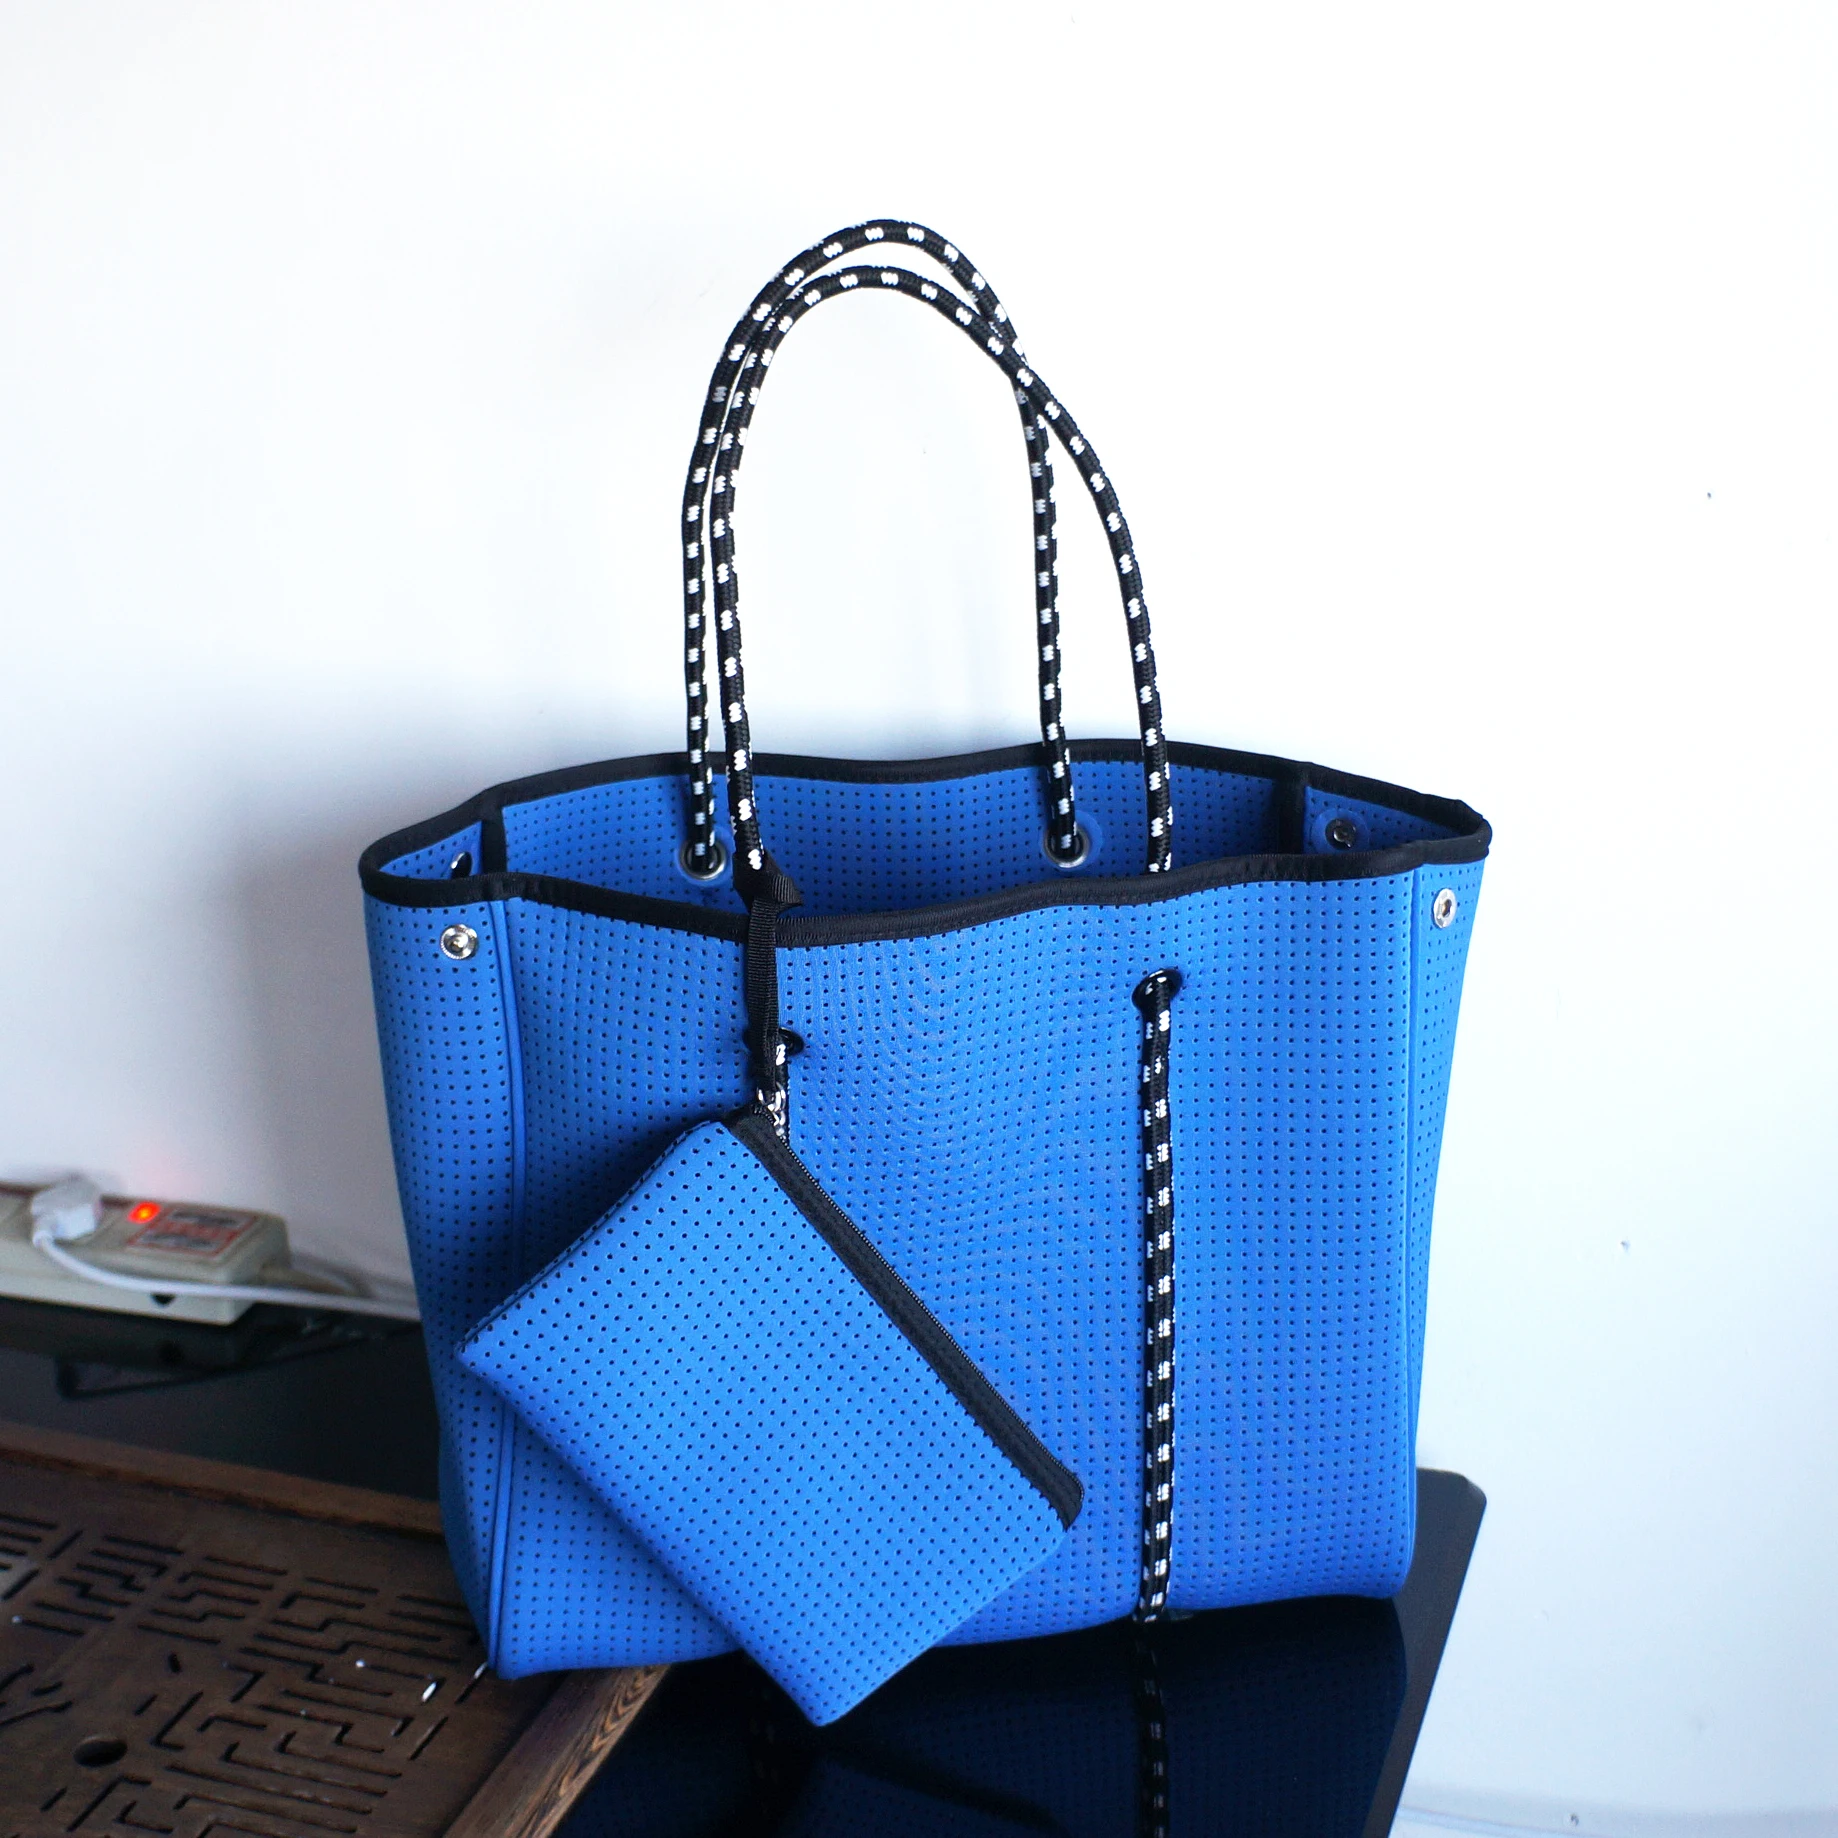 

Hot tend good quality Perforated Neoprene tote bag,women fashion handbag for traveling shopping, Any colors are available